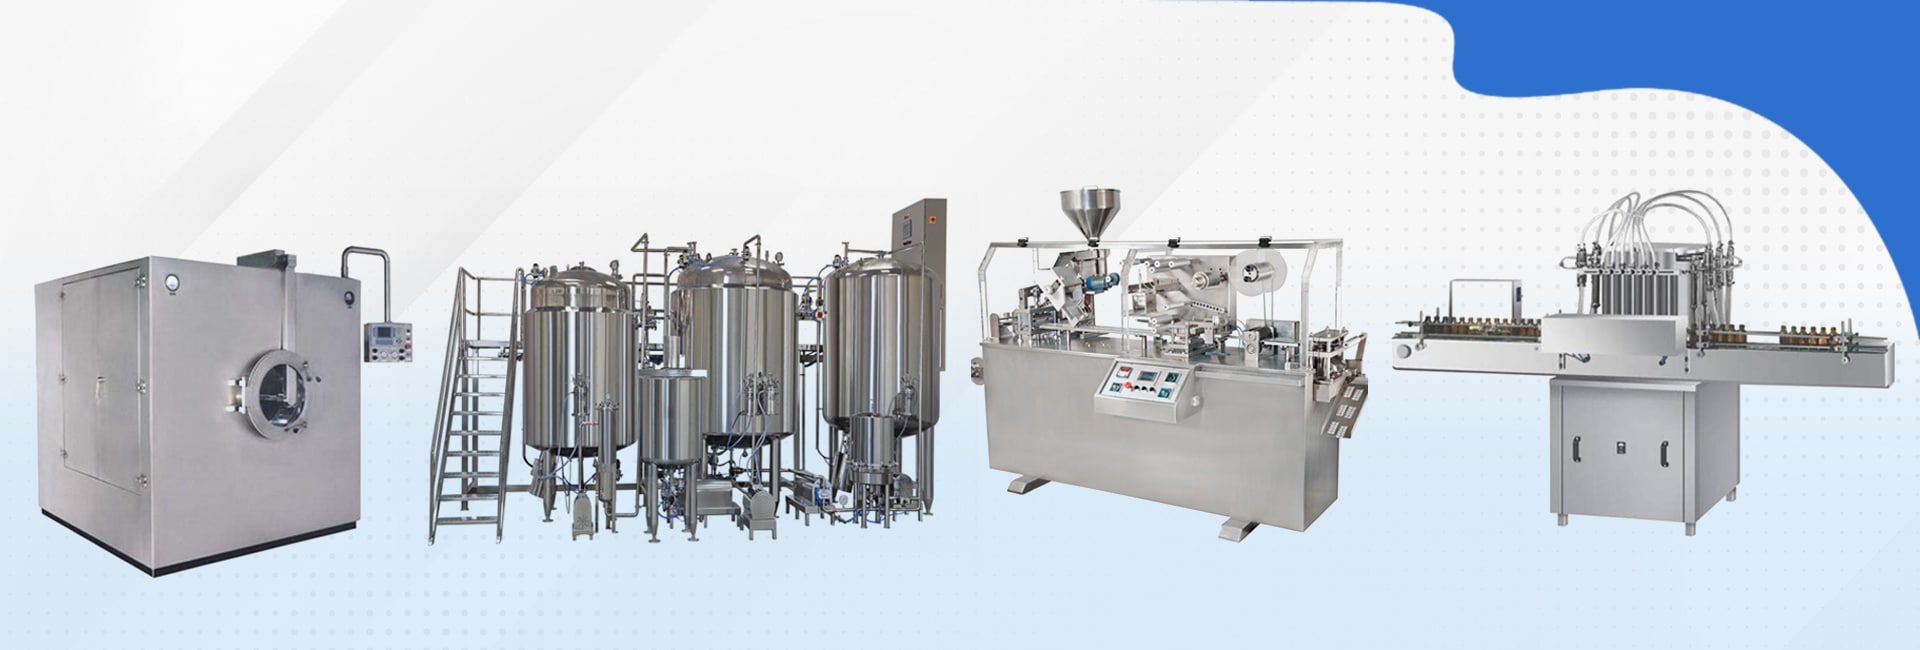 Processing Plant For Salt Tablet Press Machine & Liquid Syrup Manufacturing plant